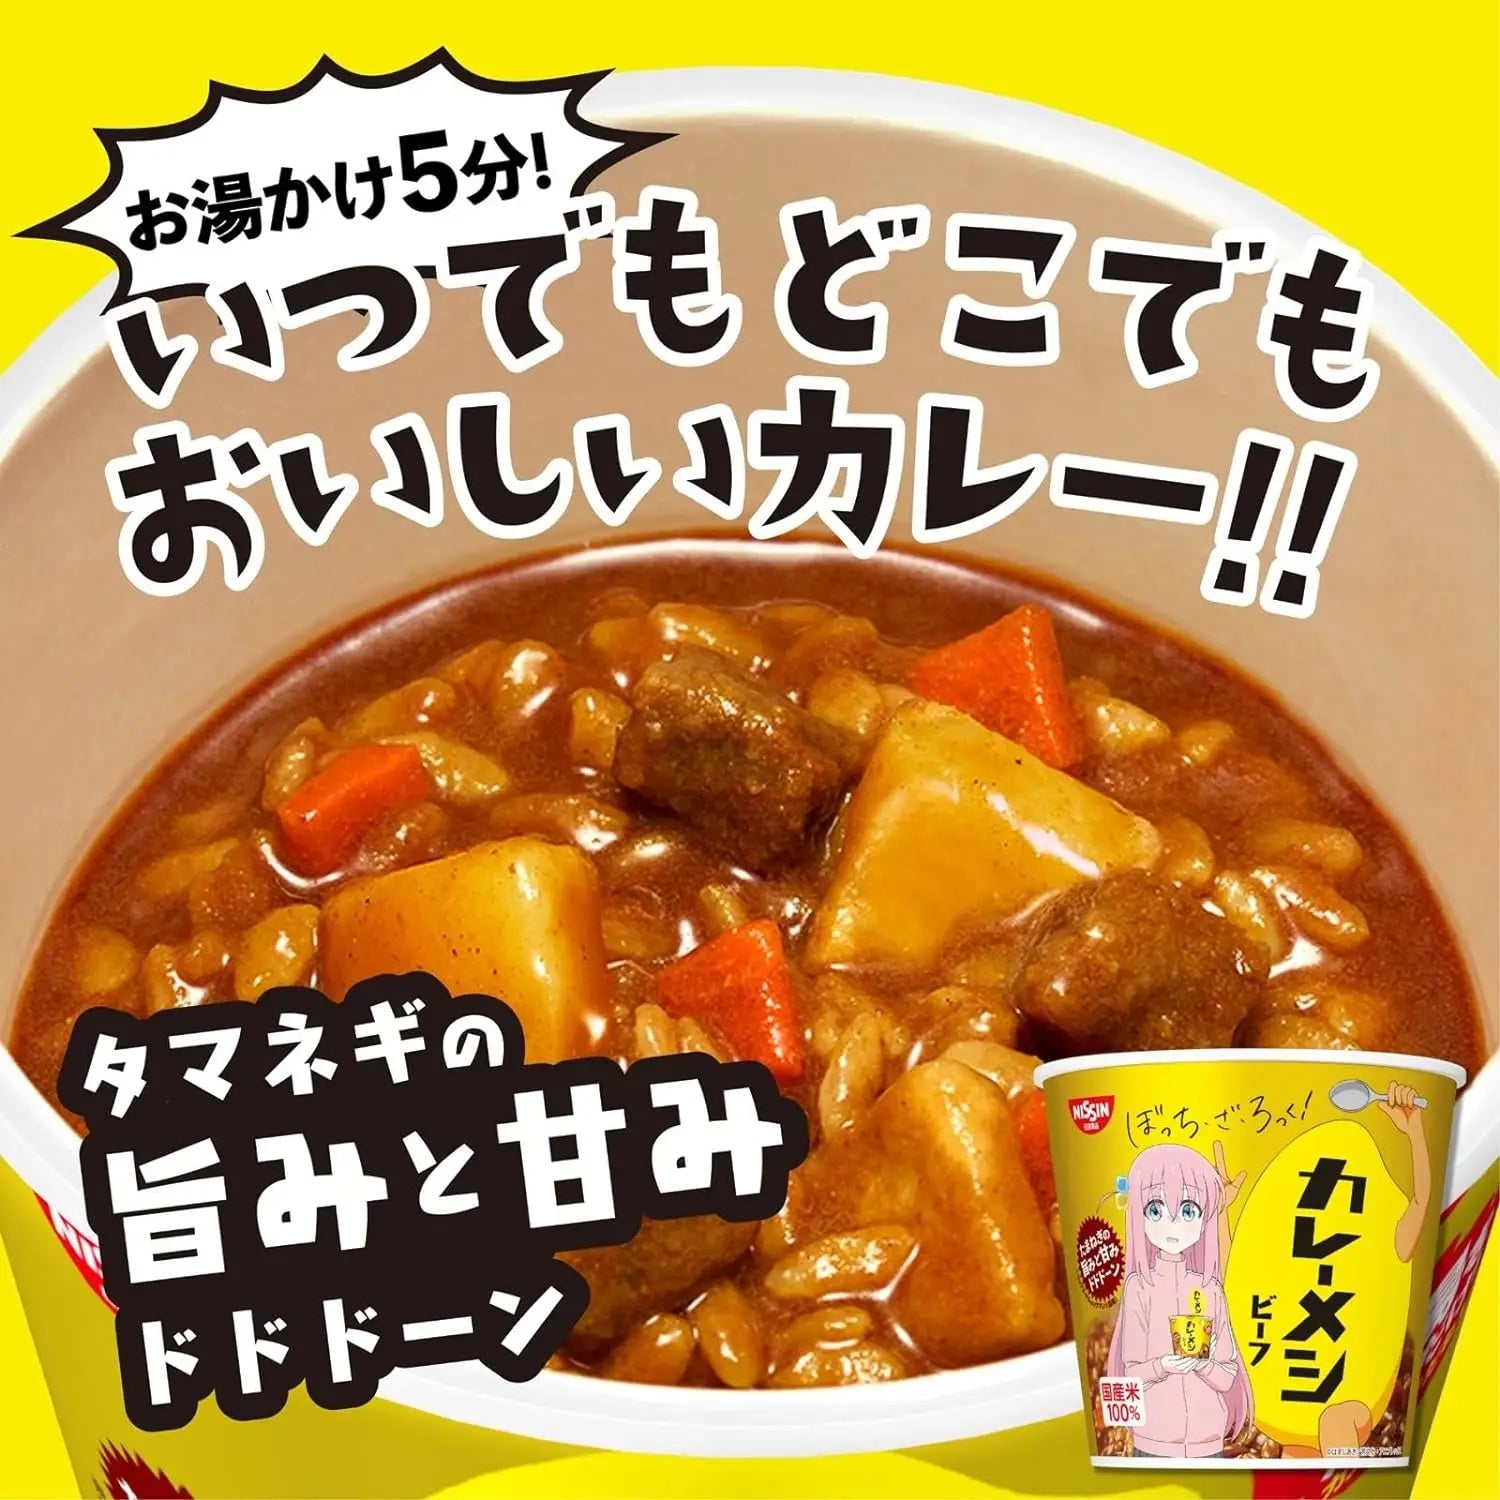 Nissin Foods Beef Curry Meshi 107g